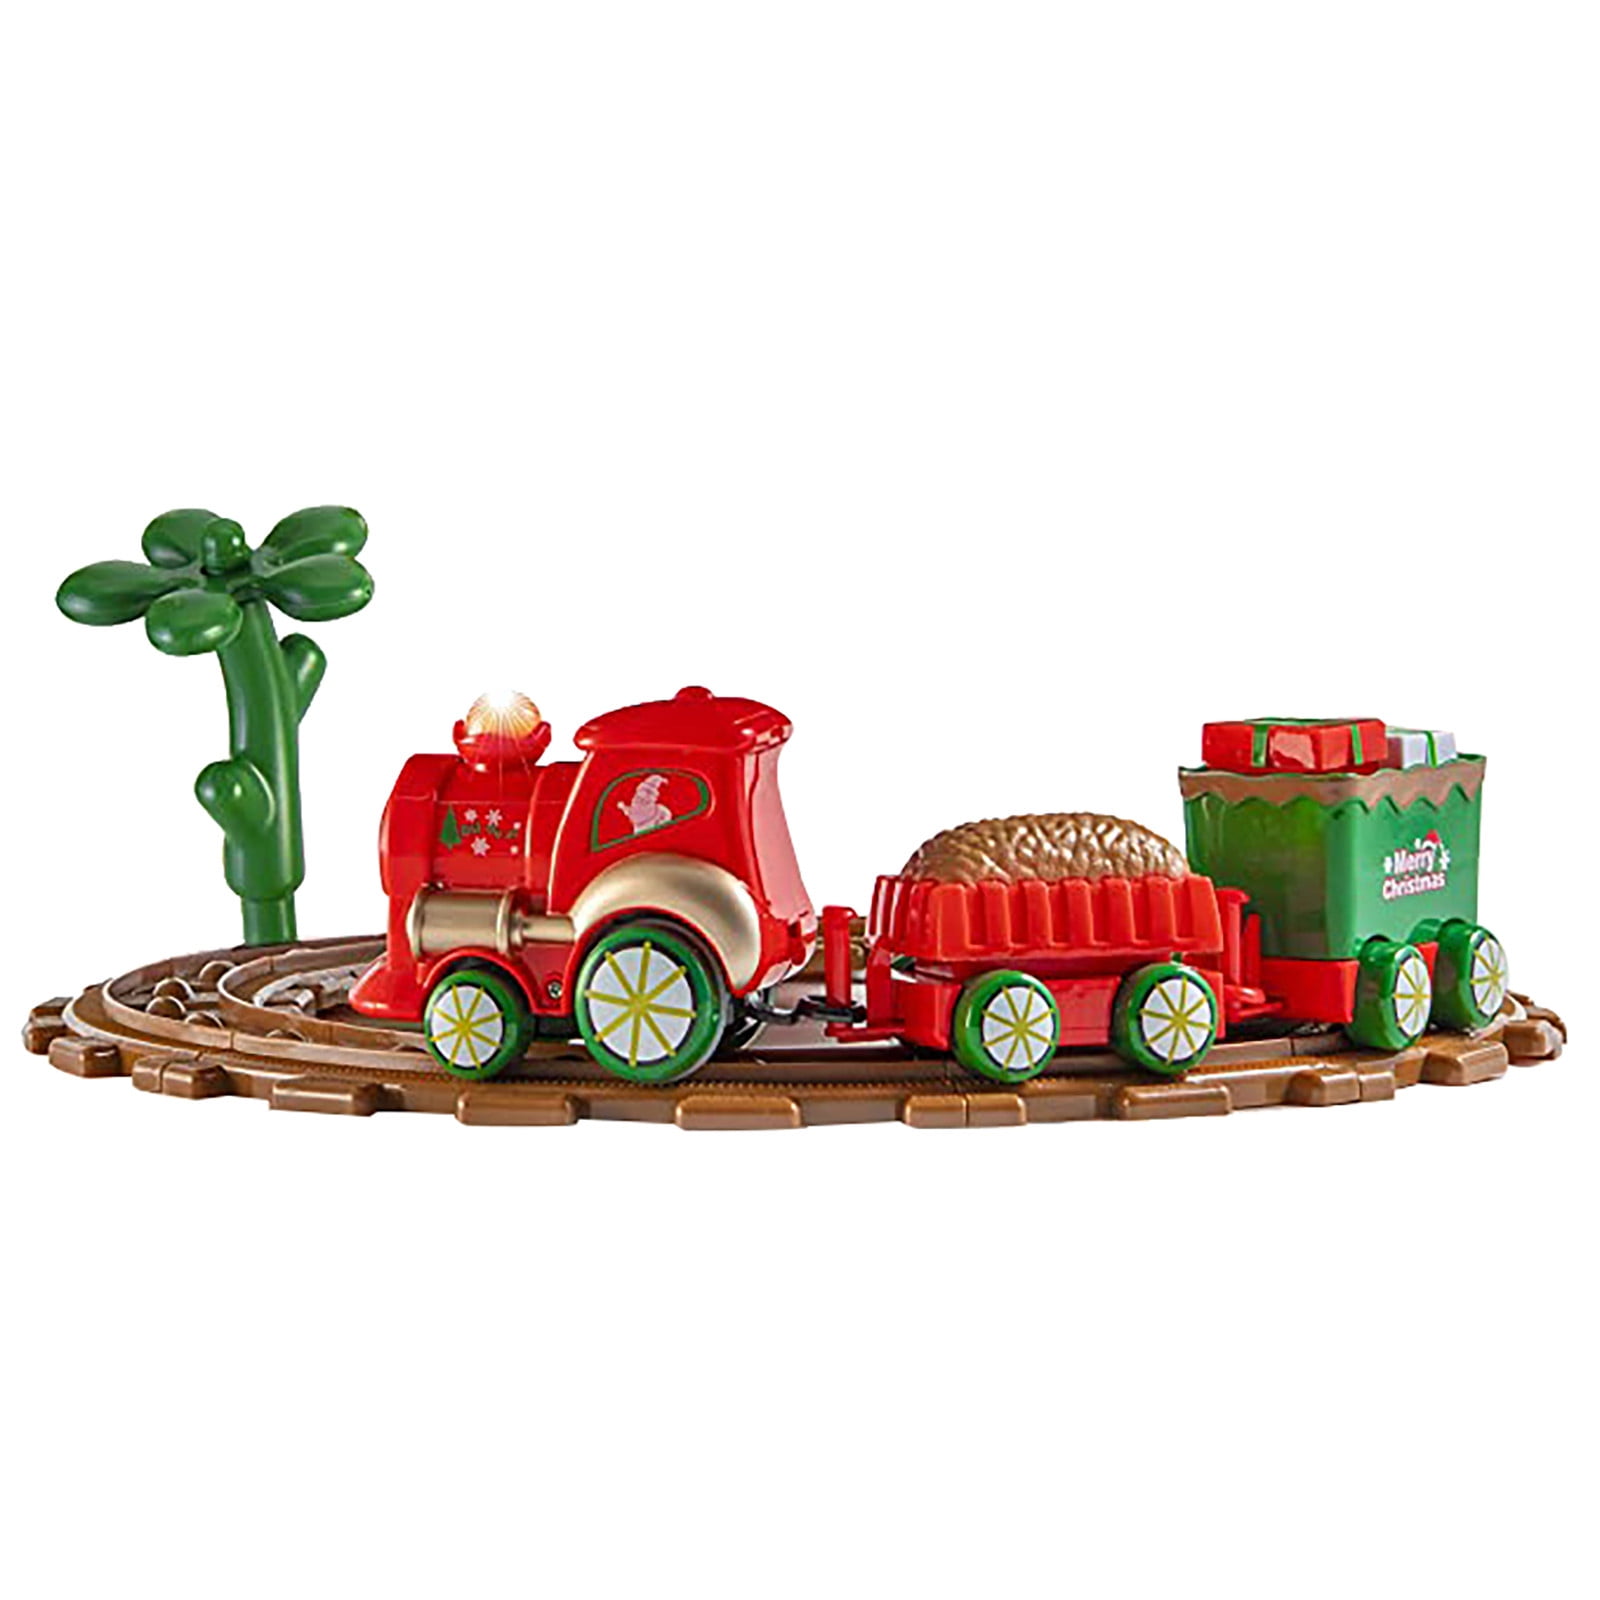 TOYANDONA Magnetic Electric Train Battery Operated Action Locomotive Train Miniature Engine Train Set for Kindergarten Decoration Present Birthday Party Gifts 